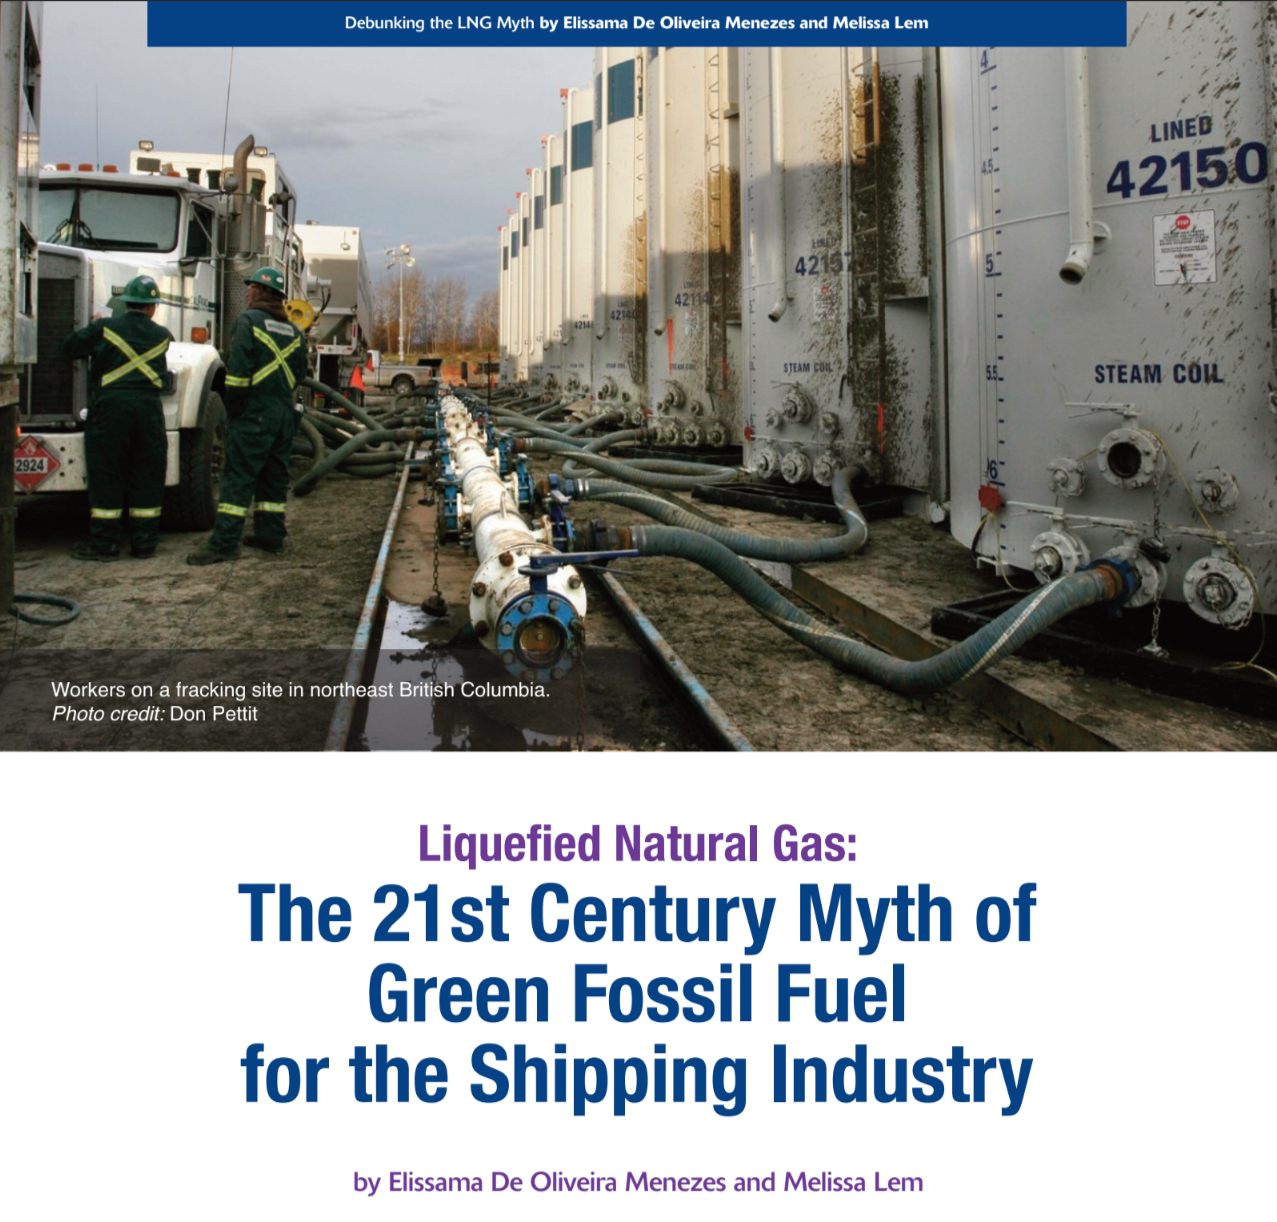 Liquefied Natural Gas: The 21st Century Myth of Green Fossil Fuel for the Shipping Industry